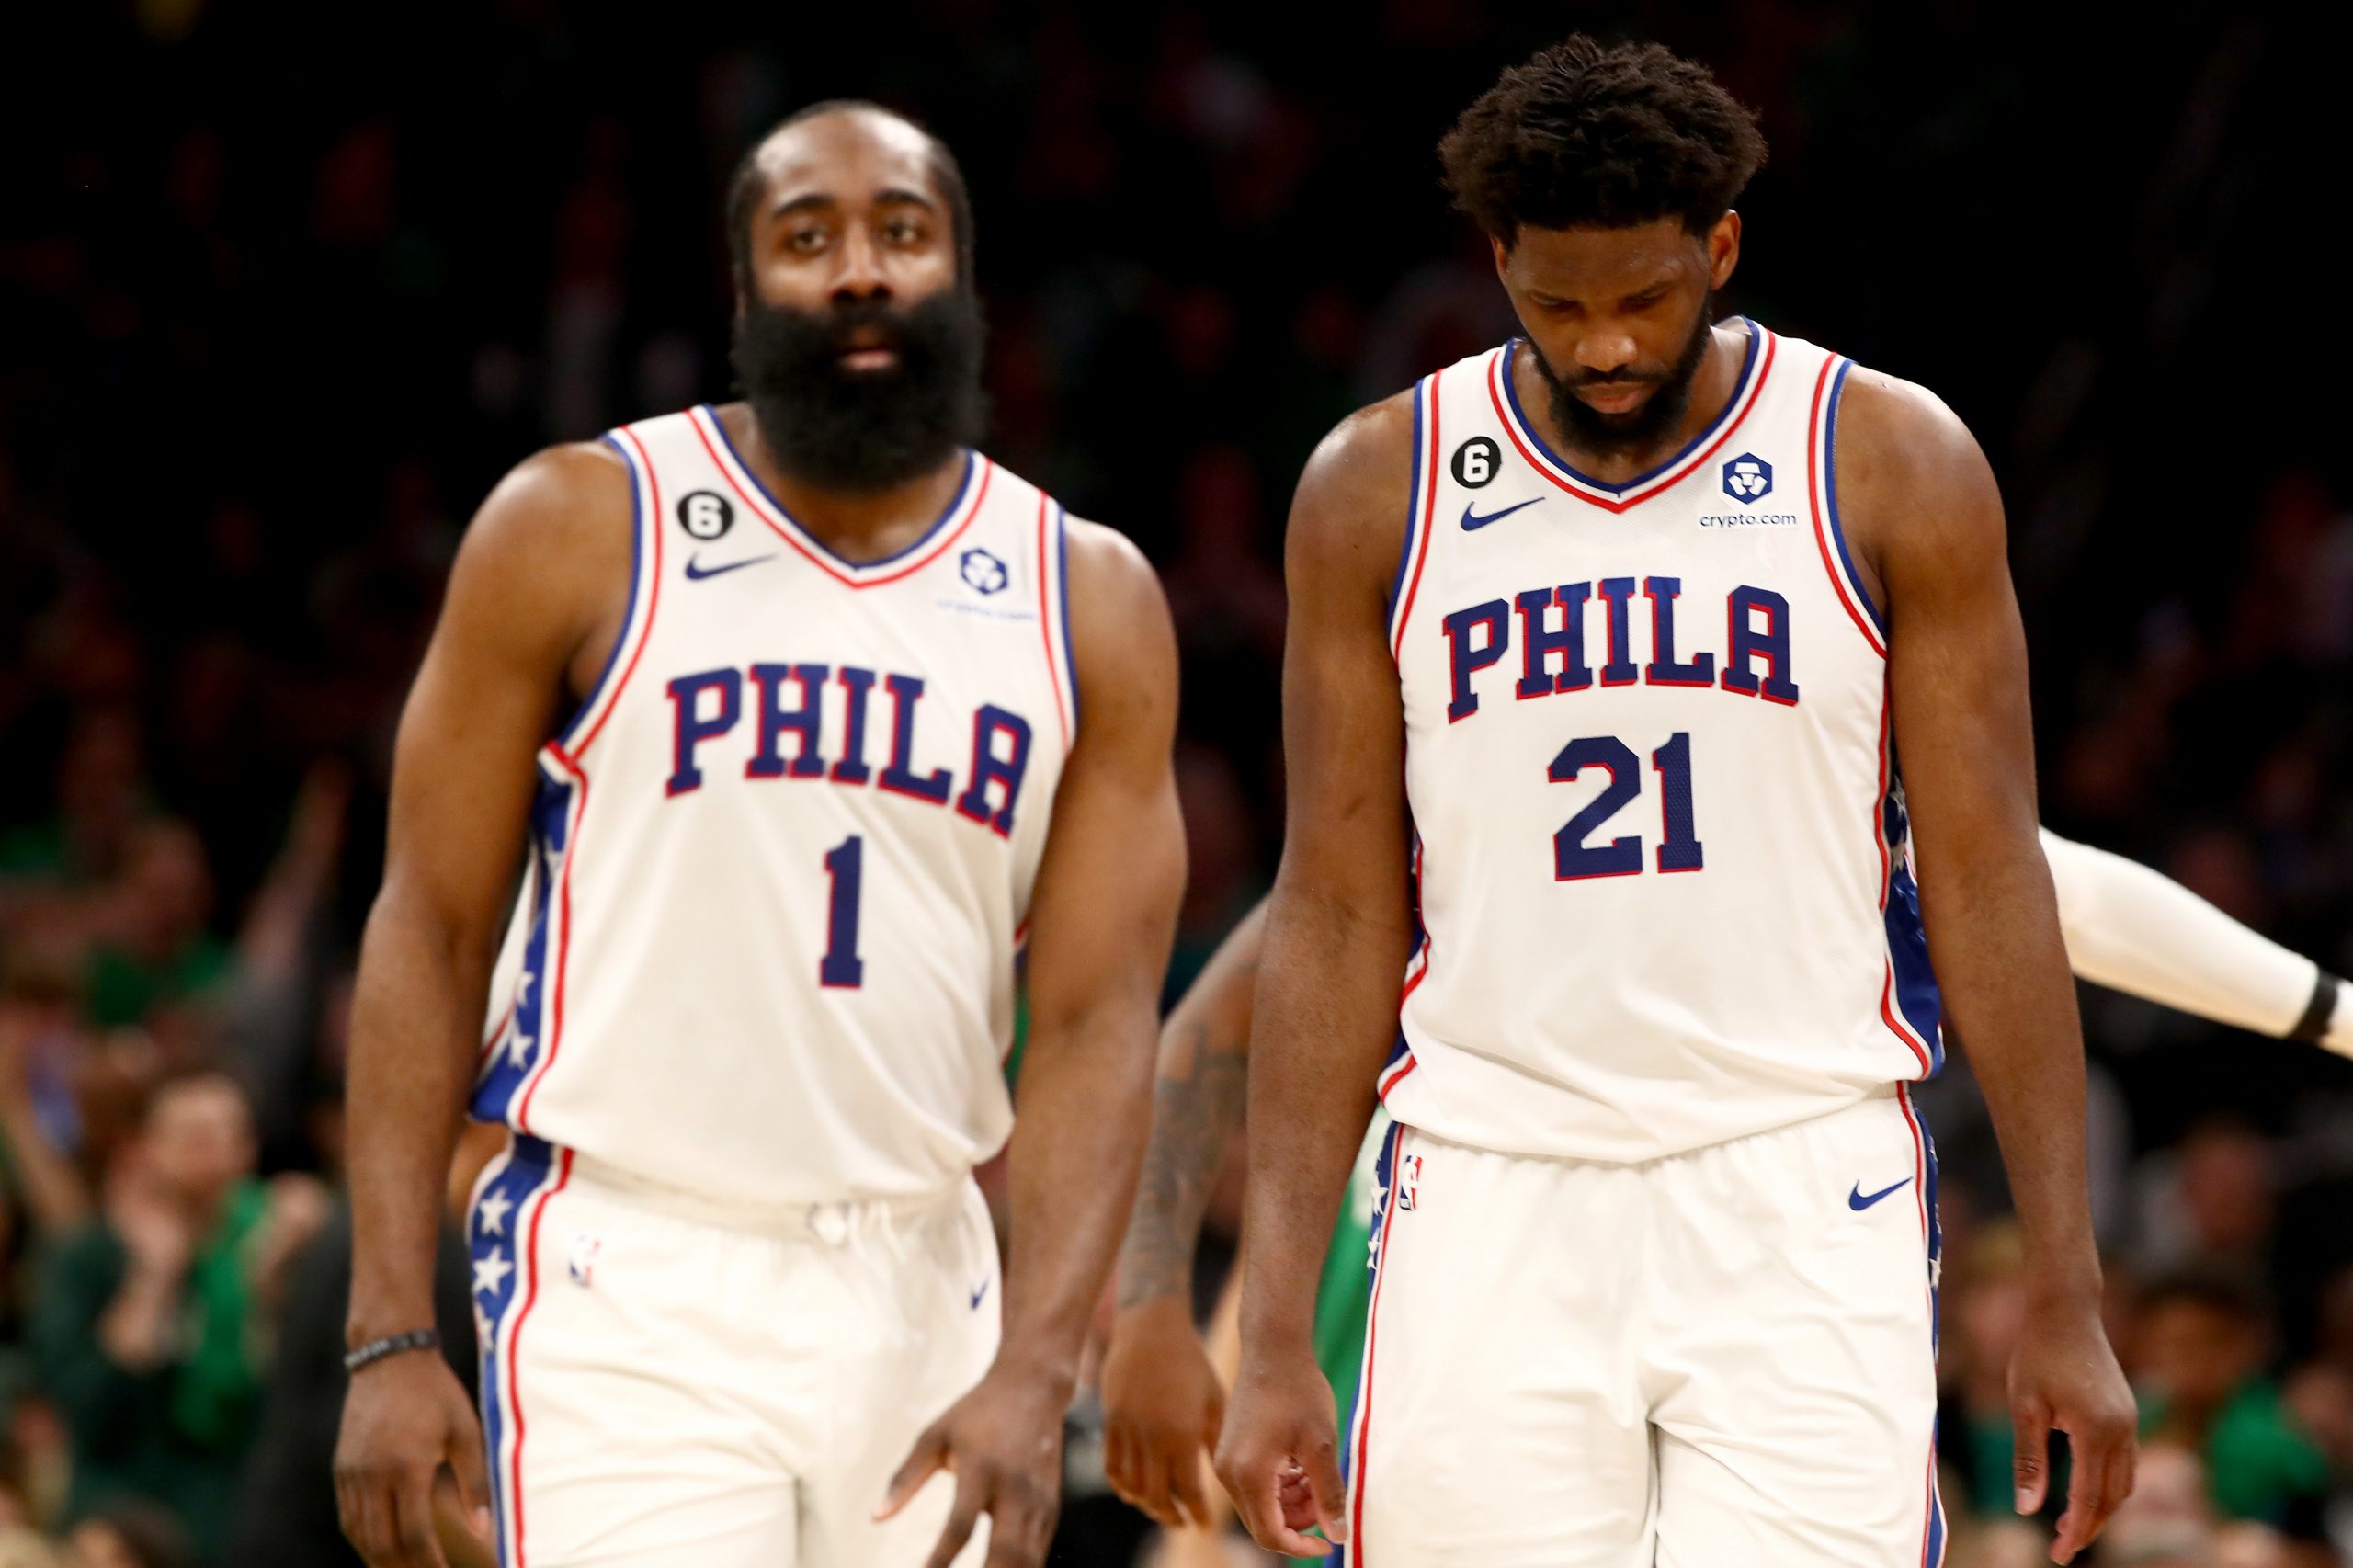 BOSTON, MASSACHUSETTS - MAY 14: James Harden #1 and Joel Embiid #21 of the Philadelphia 76ers reacts against the Boston Celtics during the third quarter in game seven of the 2023 NBA Playoffs Eastern Conference Semifinals at TD Garden on May 14, 2023 in Boston, Massachusetts. NOTE TO USER: User expressly acknowledges and agrees that, by downloading and or using this photograph, User is consenting to the terms and conditions of the Getty Images License Agreement. (Photo by Adam Glanzman/Getty Ima